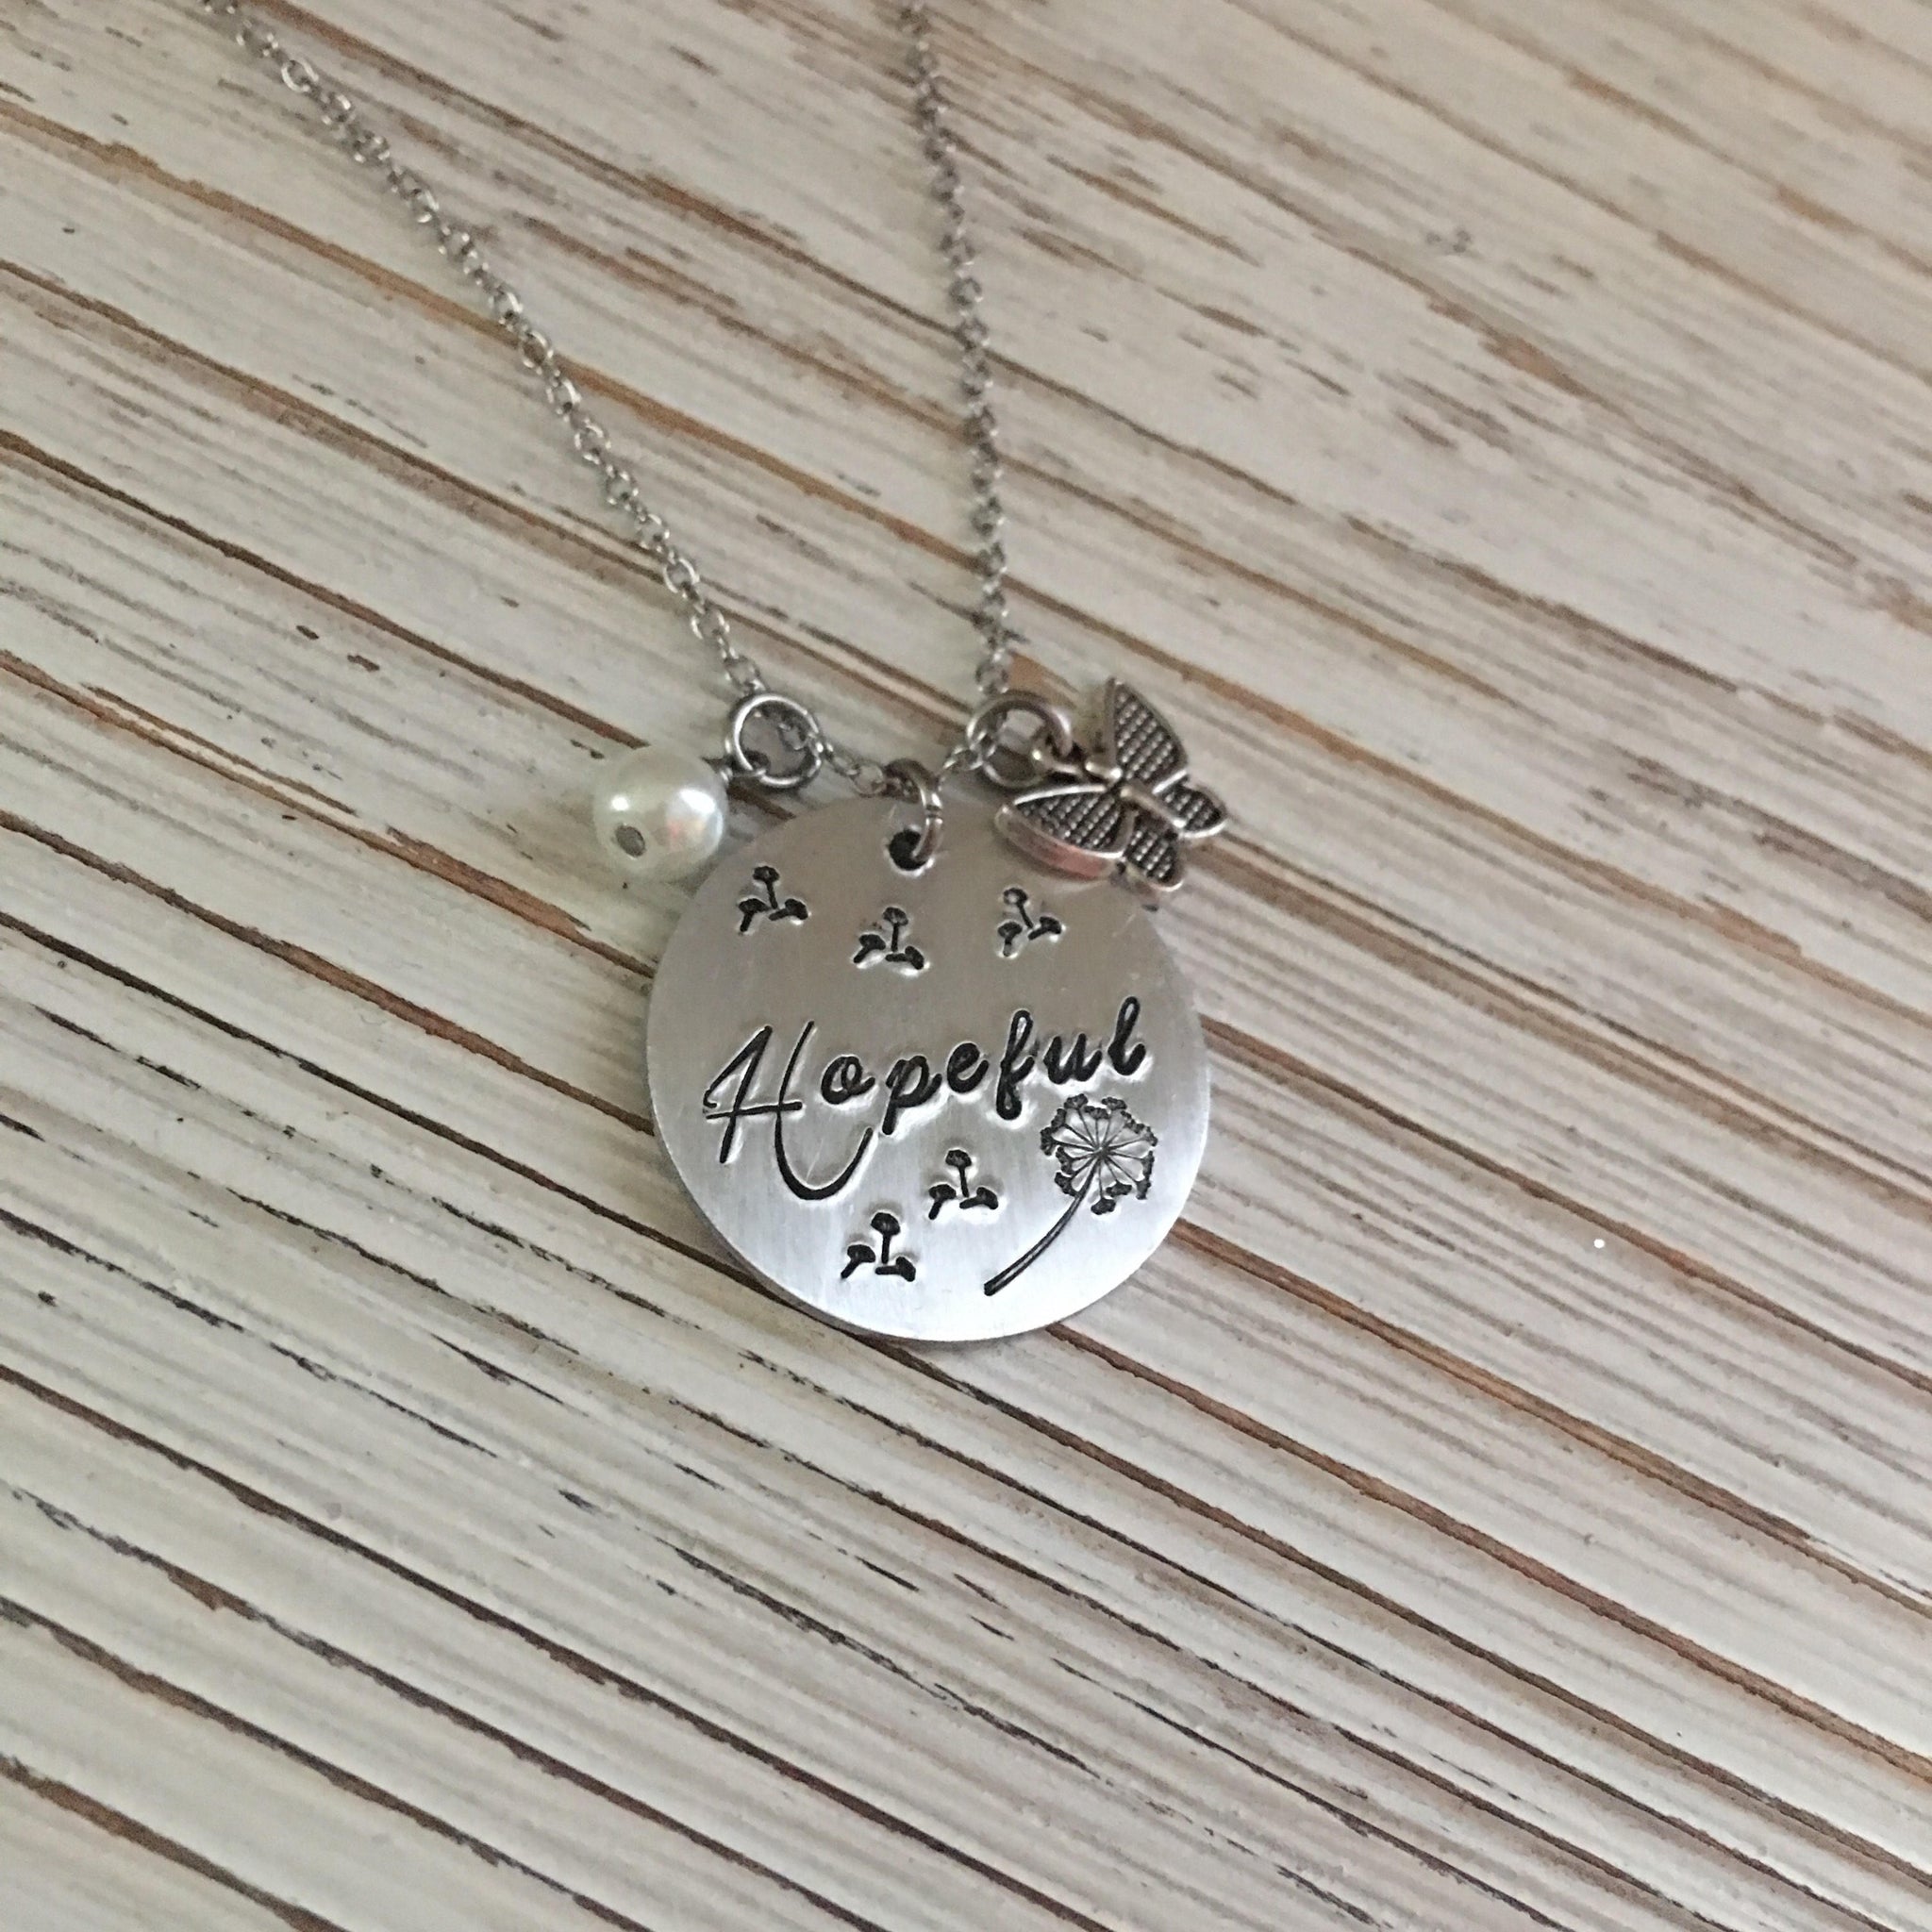 Hopeful Hand Stamped Necklace - SoulCysterCreations